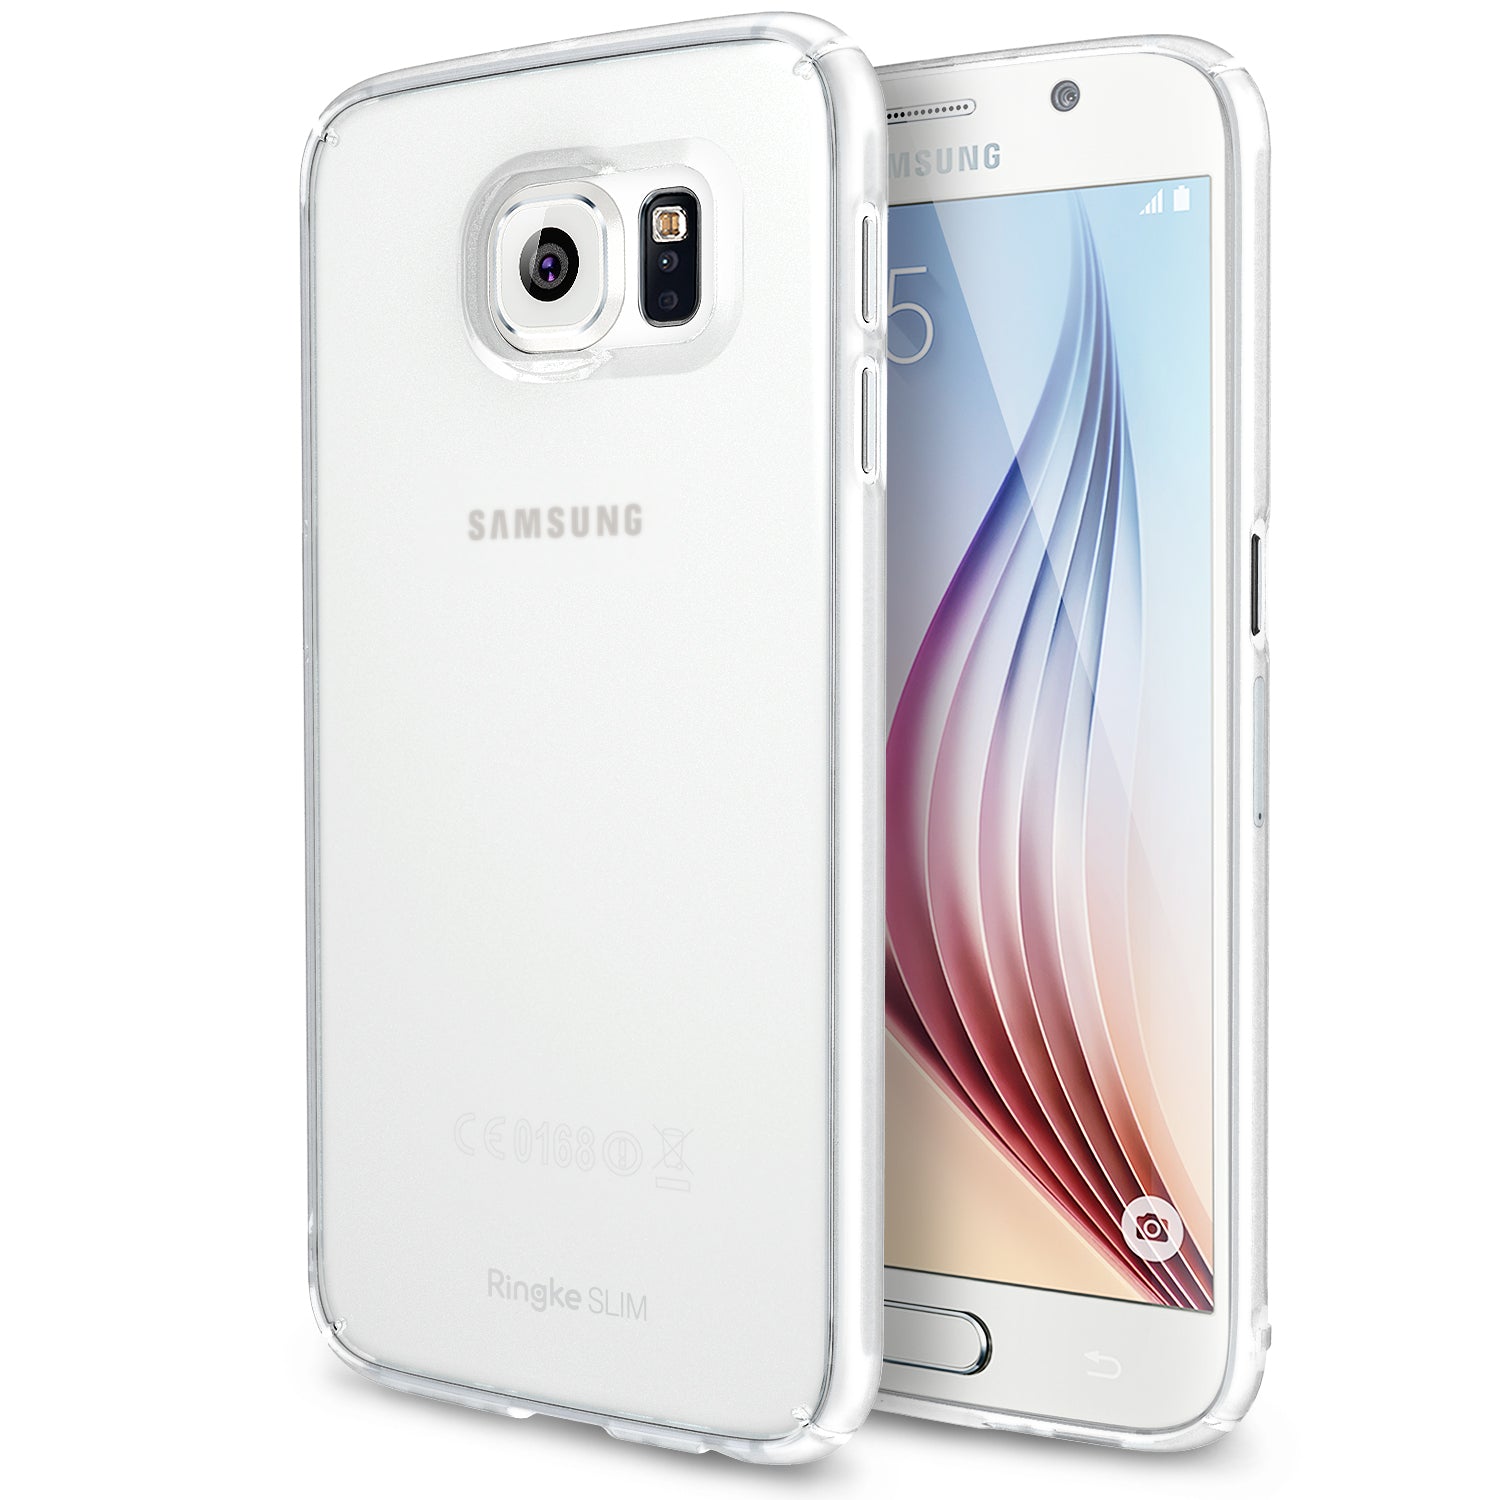 ringke slim premium hard pc protective back cover case for galaxy s6 frost white